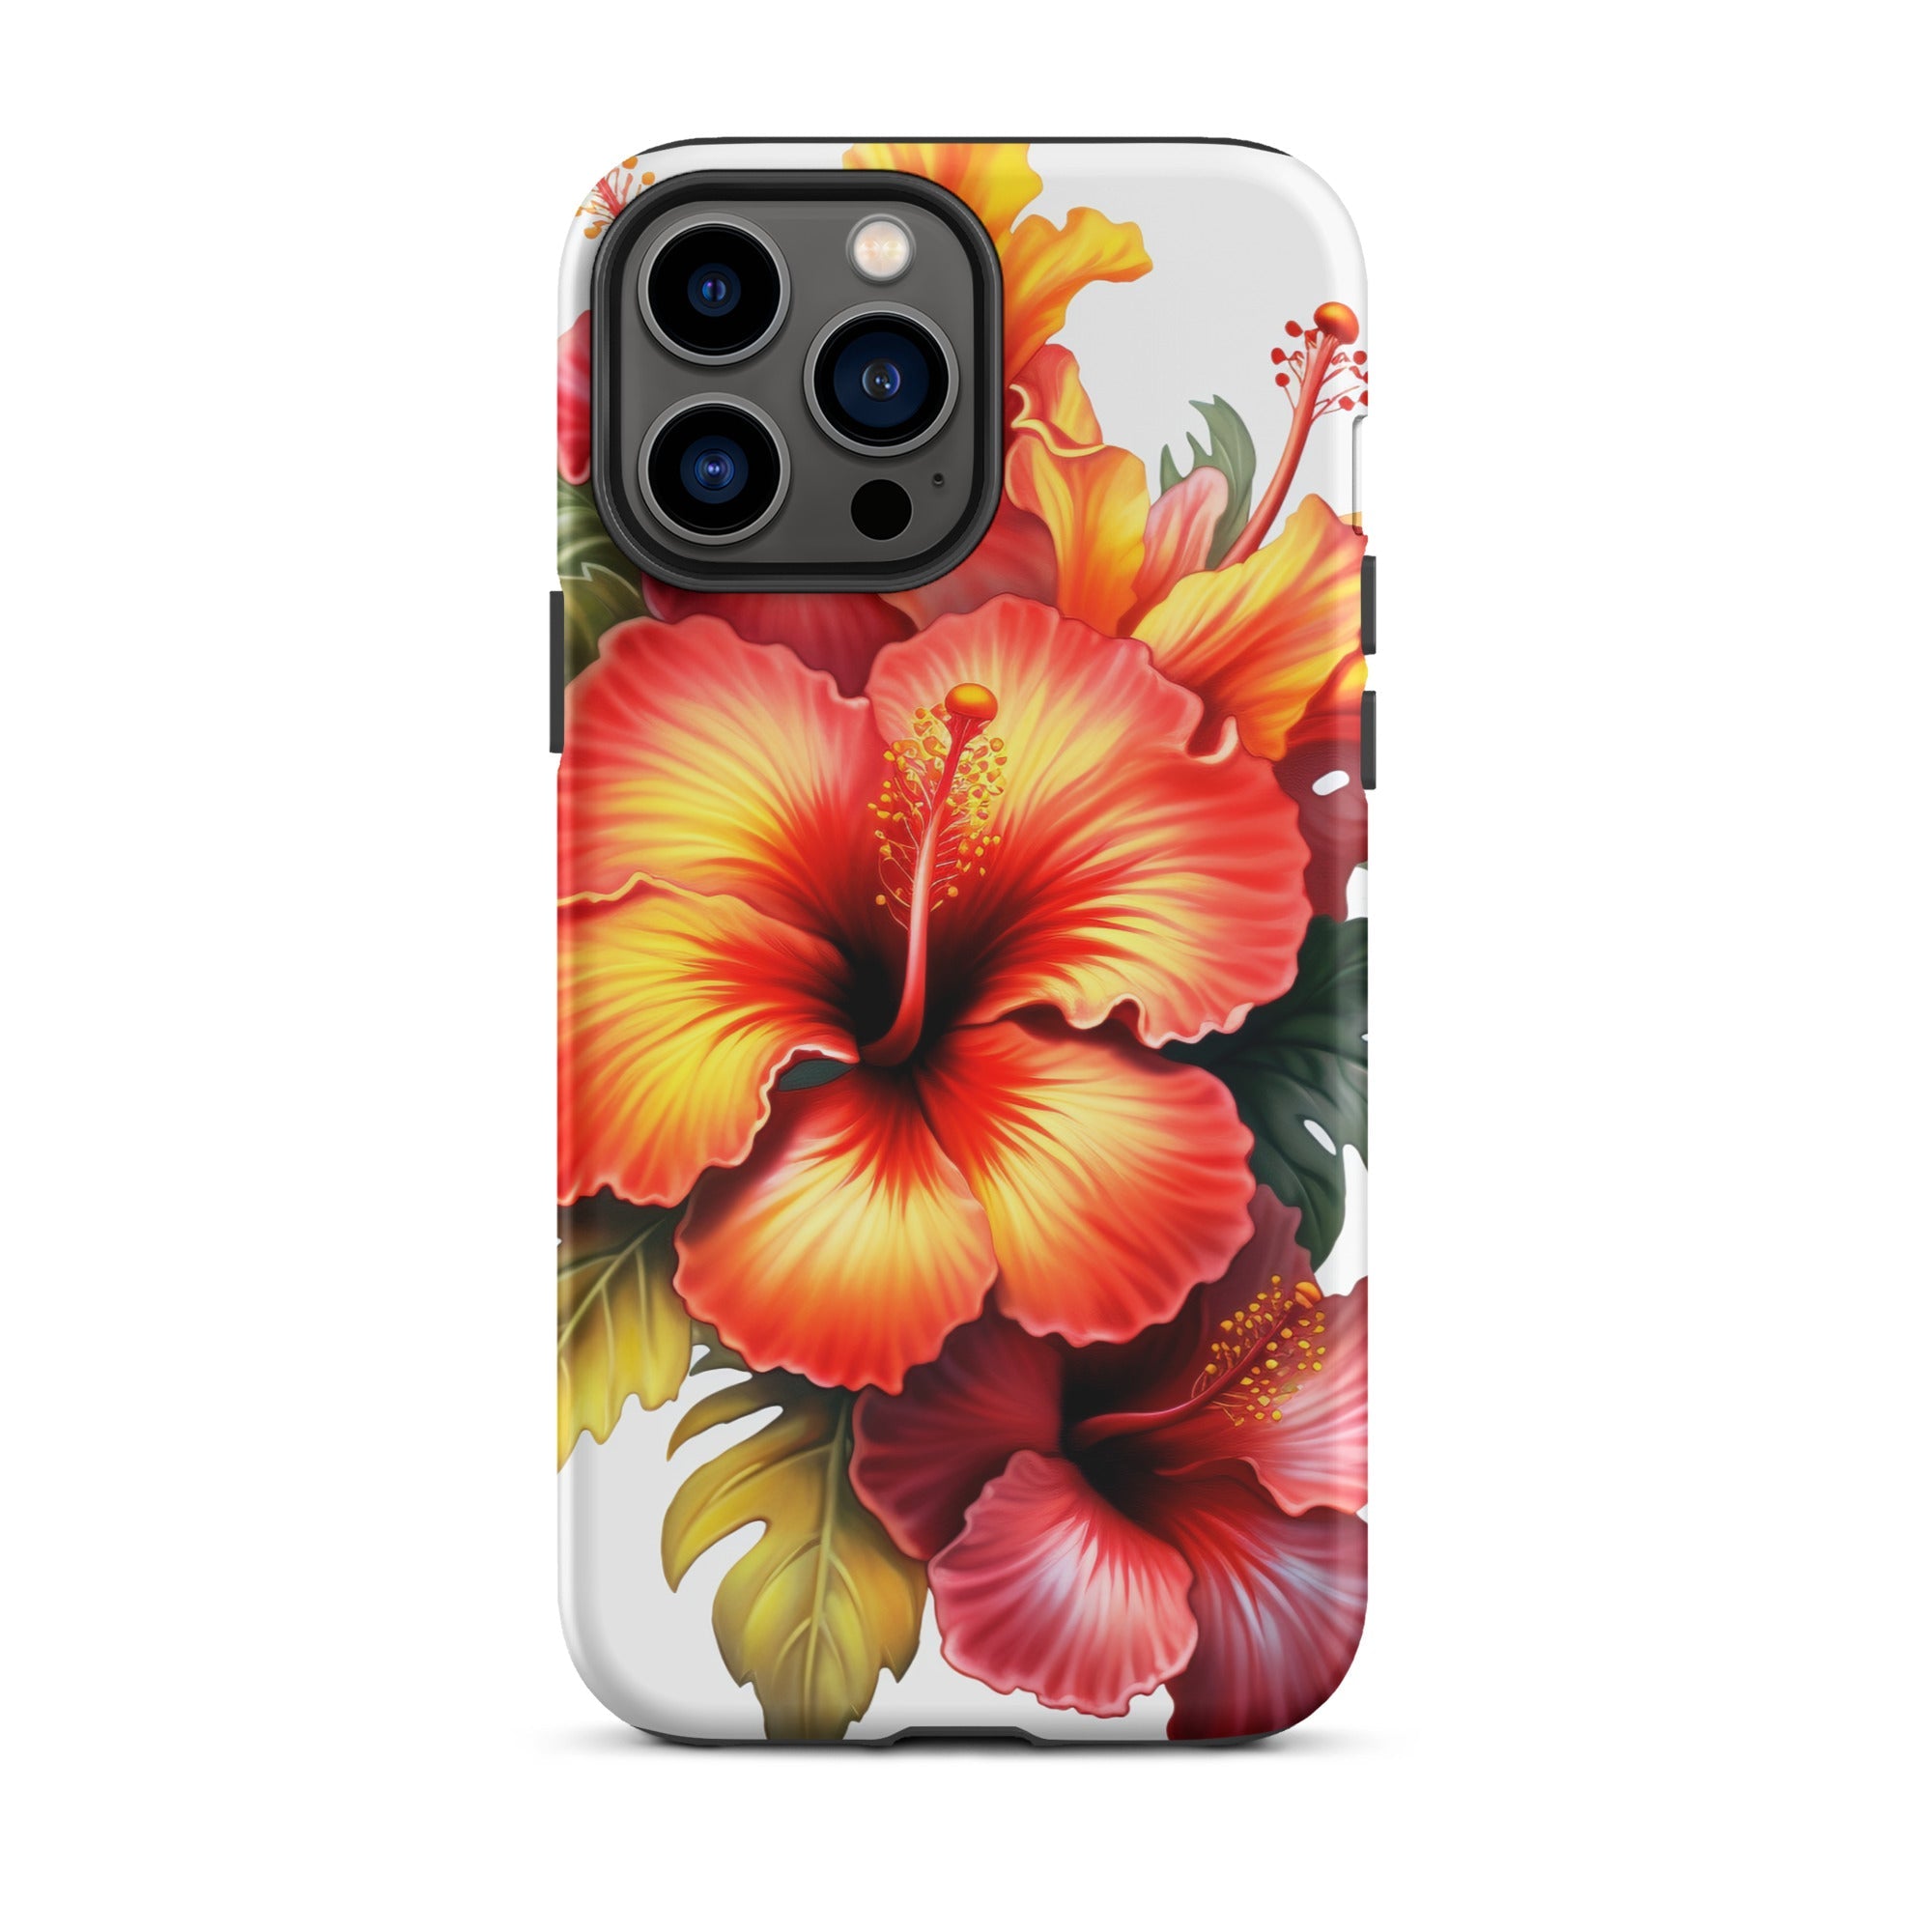 Hibiscus Flower iPhone Case by Visual Verse - Image 22